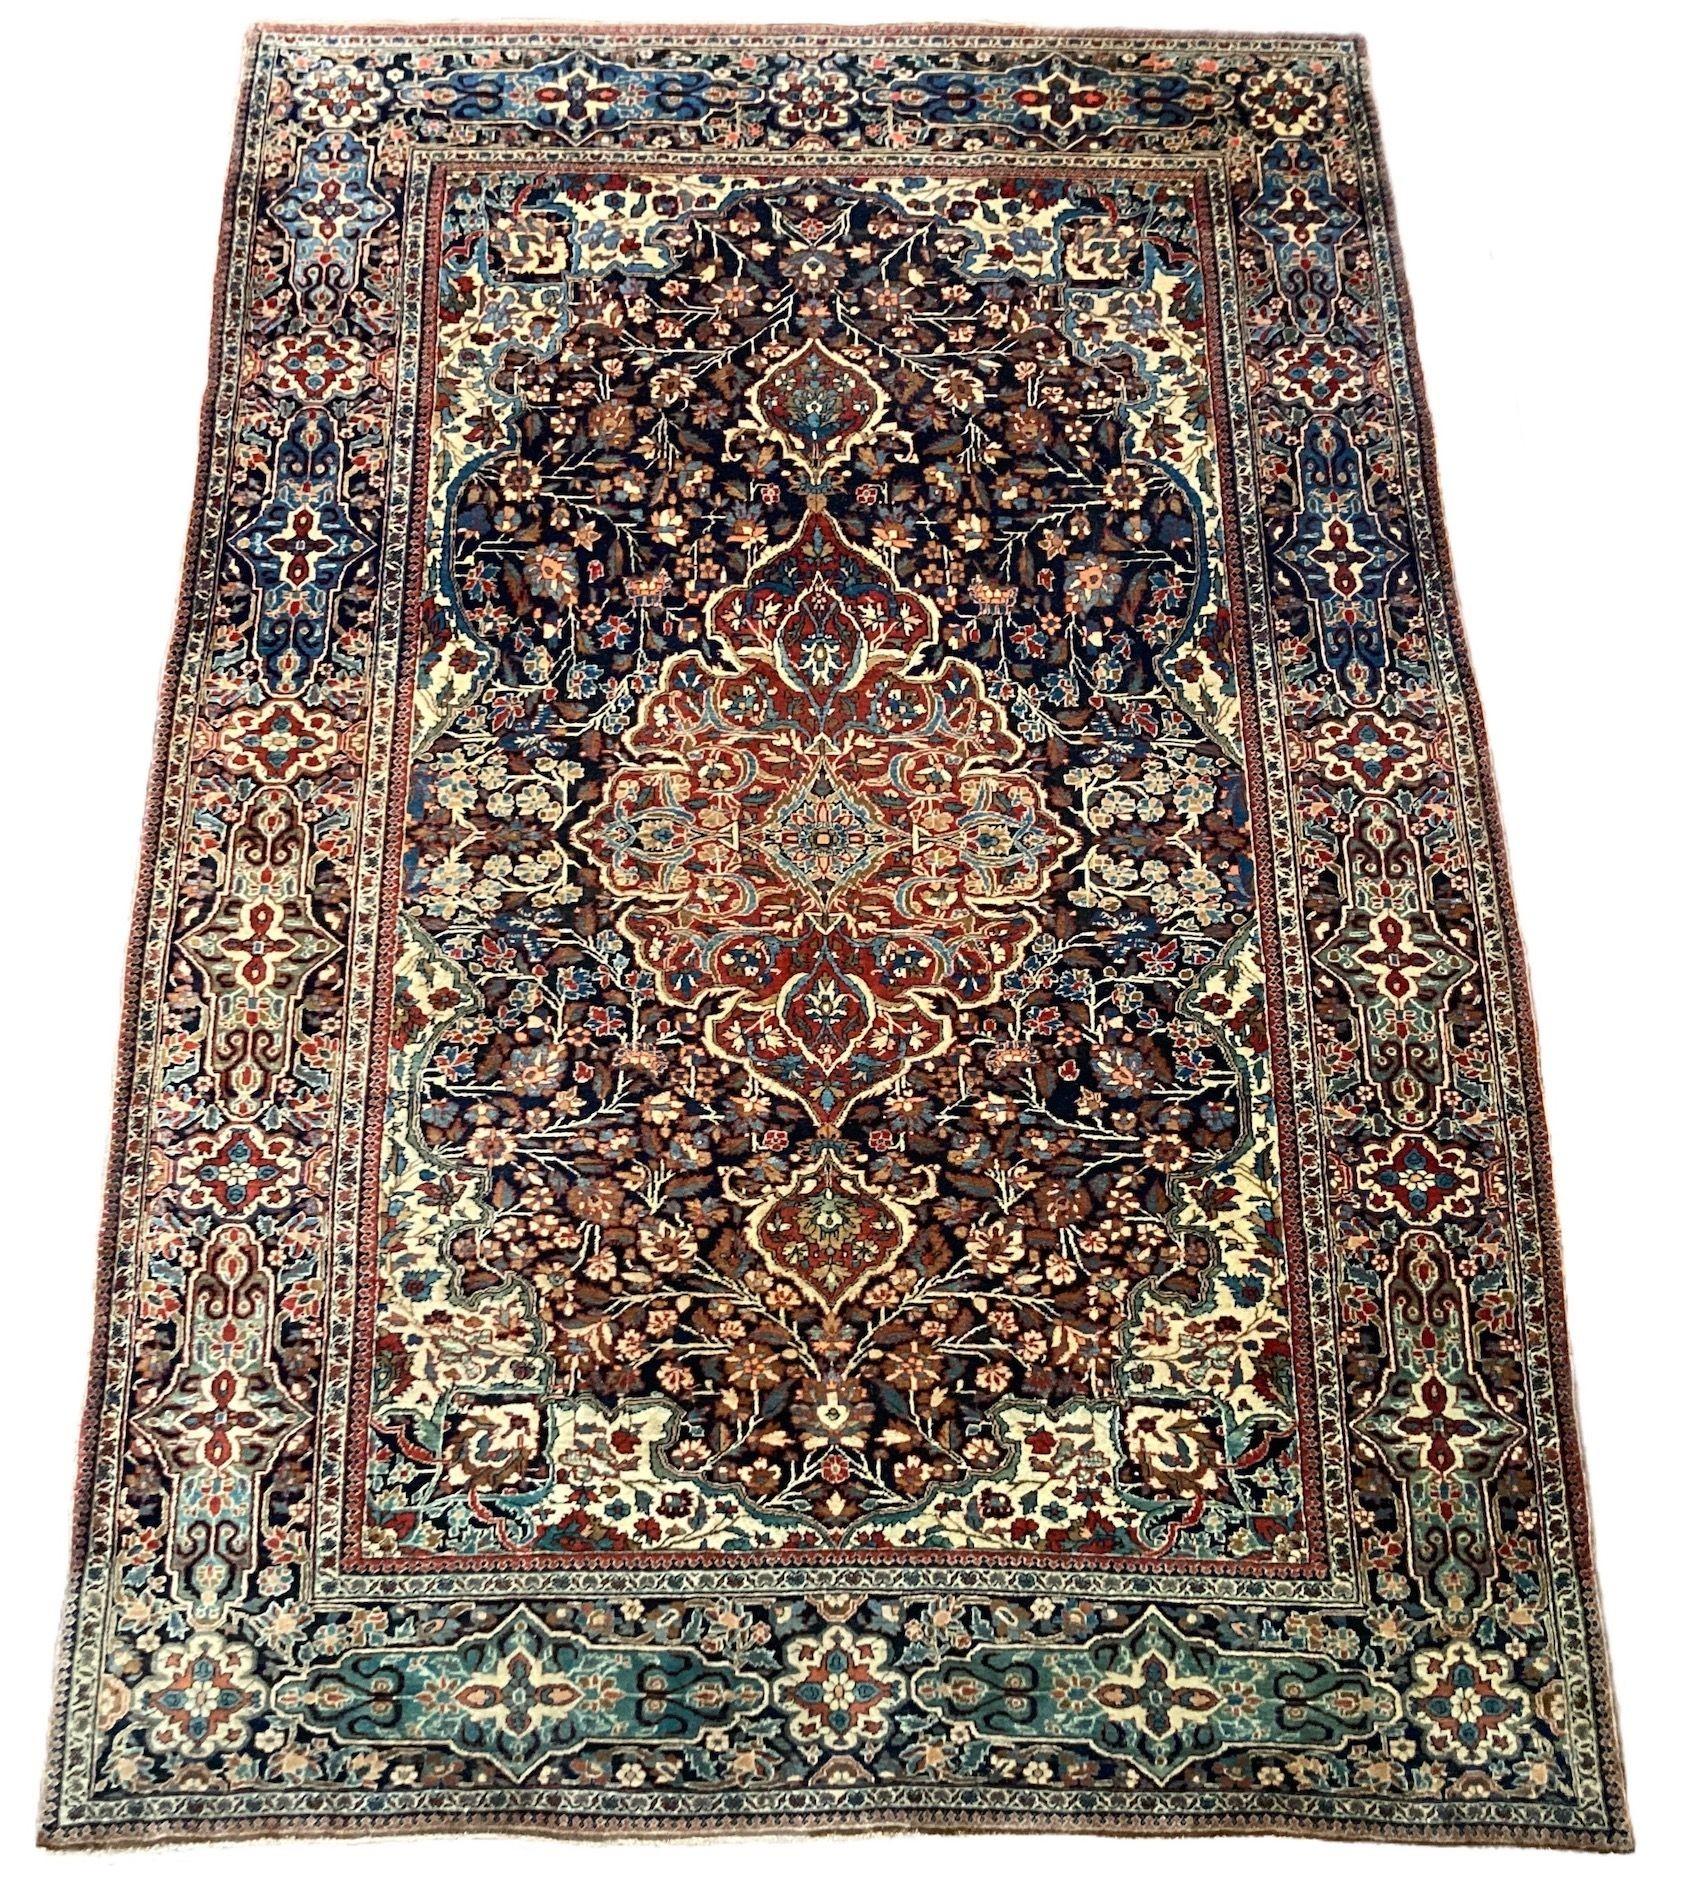 A lovely antique Kashan rug, handwoven circa 1900 featuring a floral design on a deep indigo field around an elegant terracotta medallion and similar border. Fabulous secondary colours, especially the light green and gold throughout the rug. Very